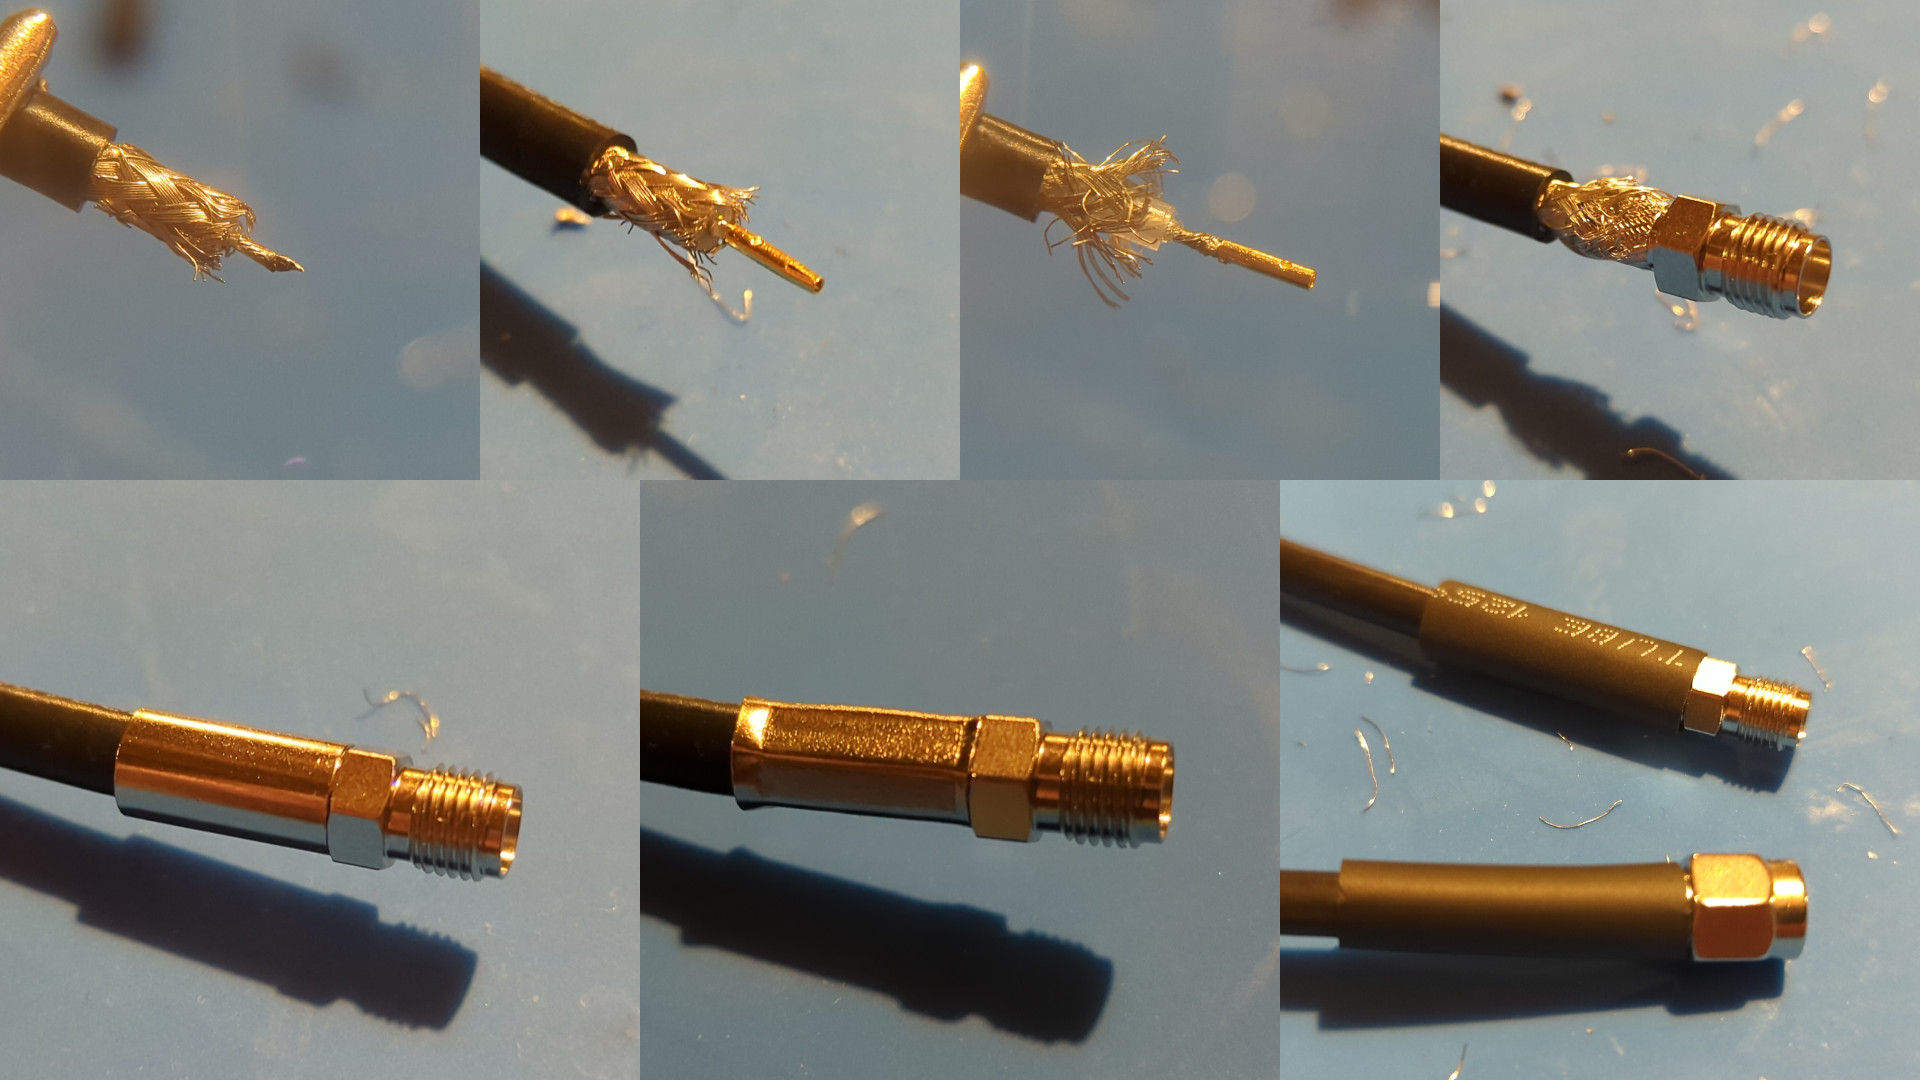 A series of seven images showing the progression from a stripped RG-58 cable end to an SMA-connectorized cable